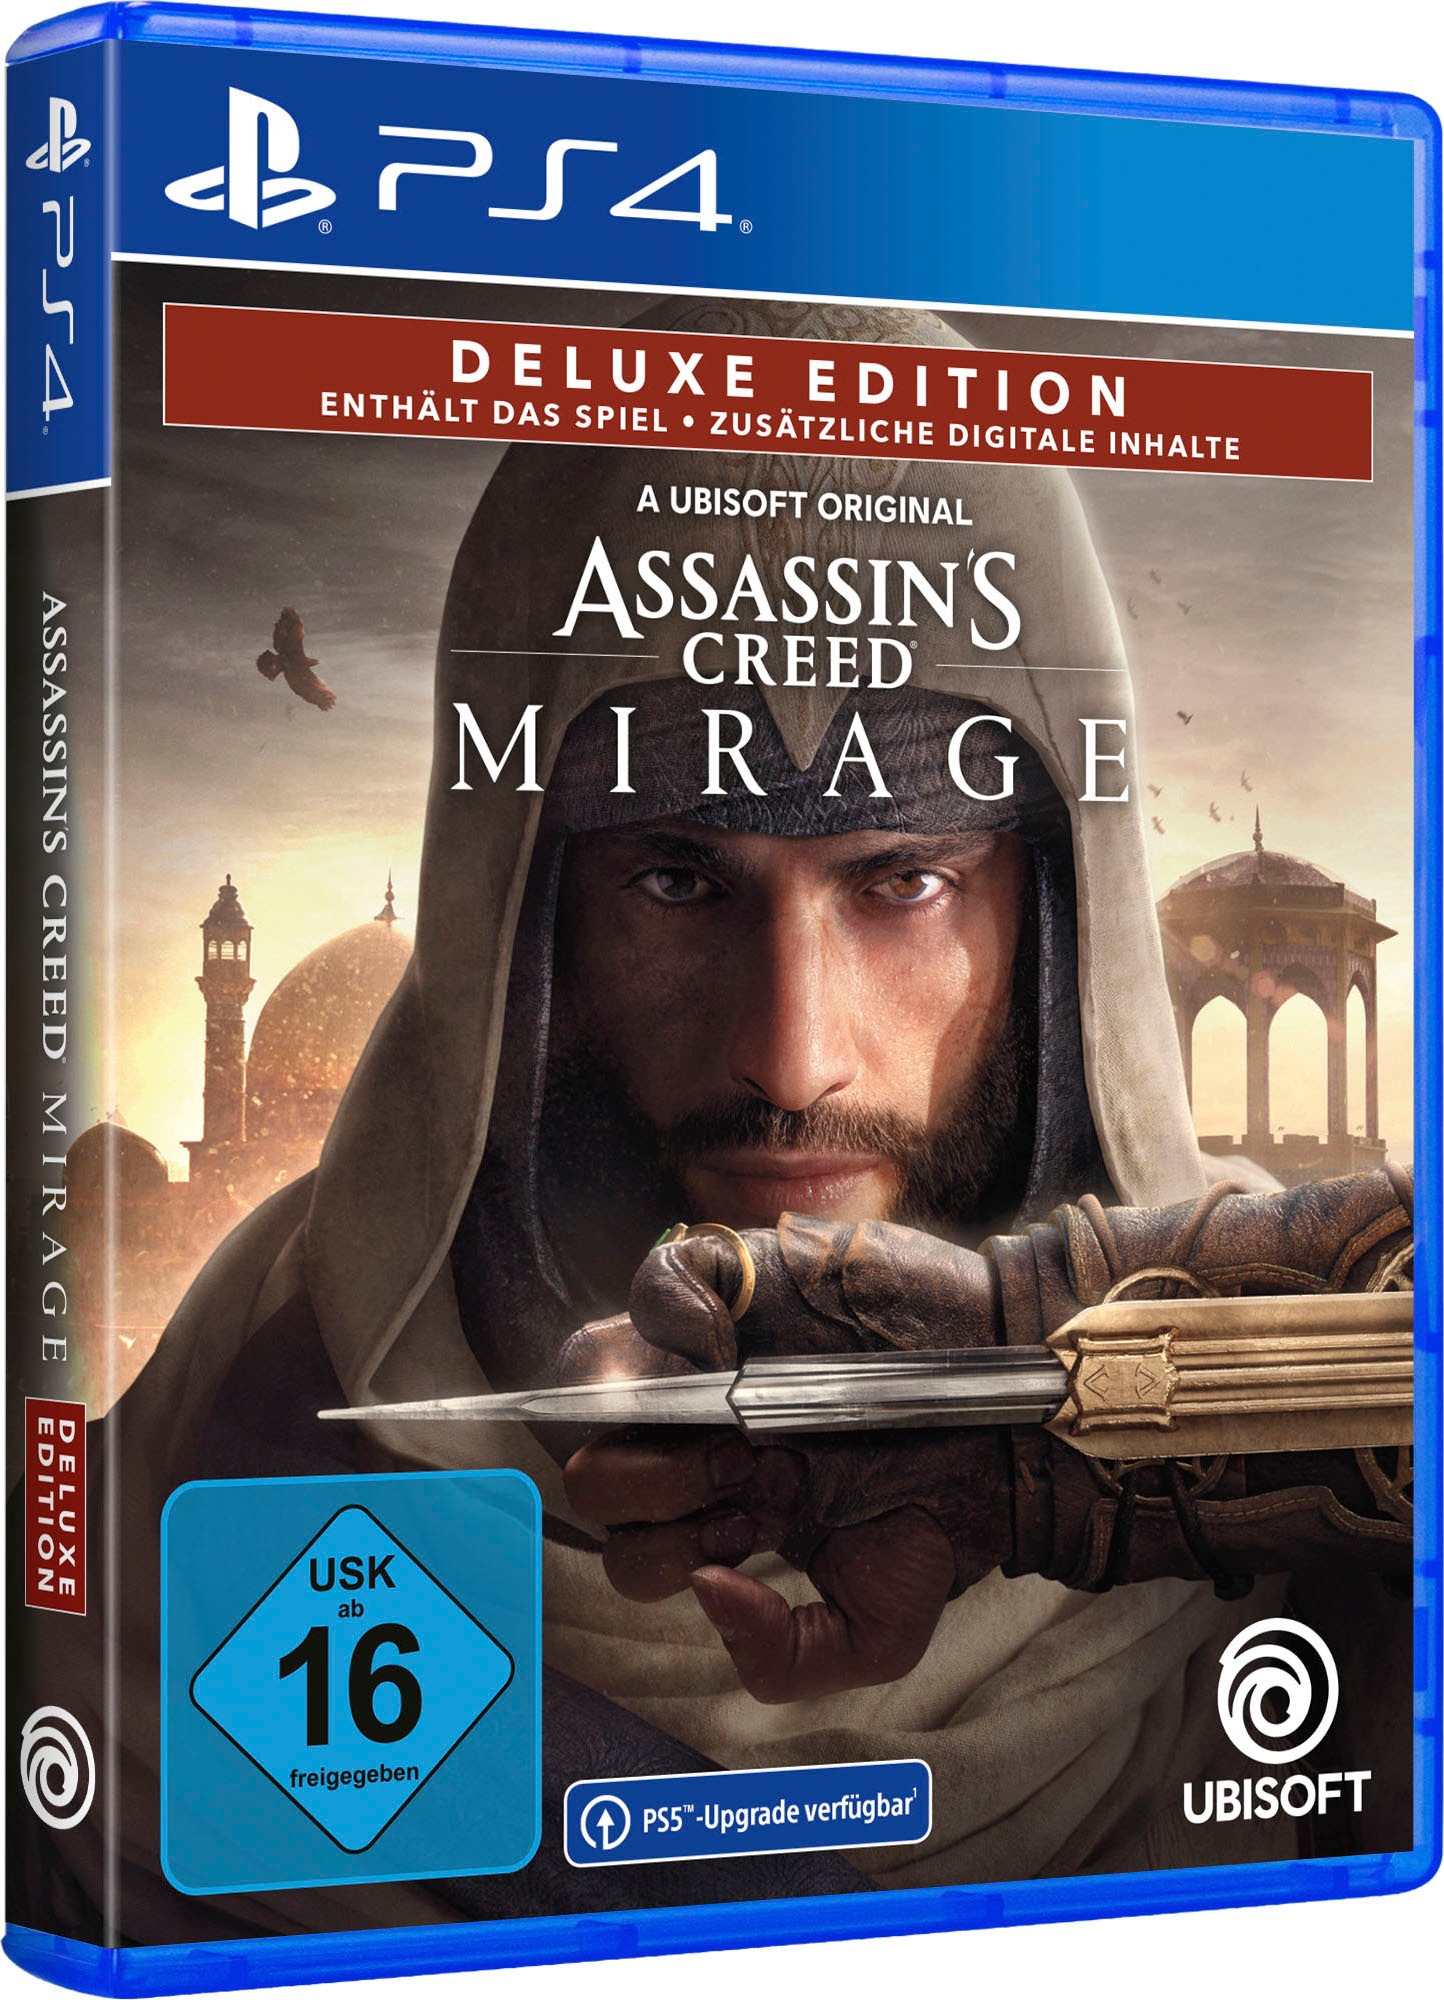 UBISOFT Spielesoftware »Assassin's Creed Mirage Deluxe Edition - (kostenloses Upgrade auf PS5)«, PlayStation 4